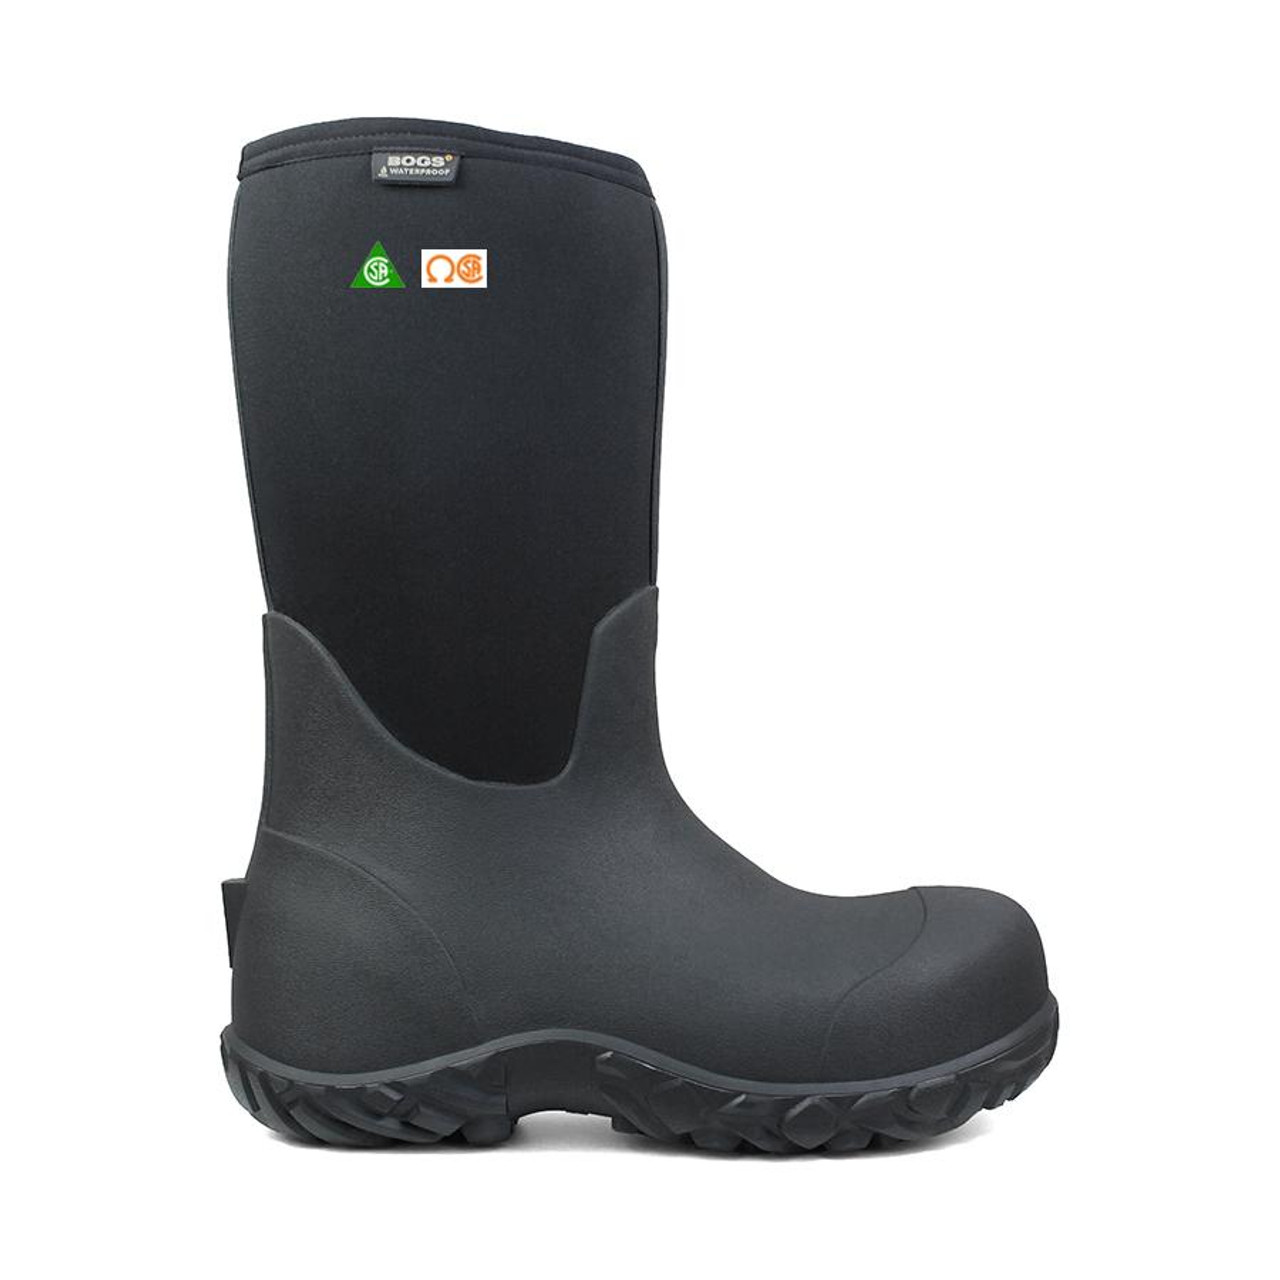 Bogs Workman CSA Rubber Safety Boot 